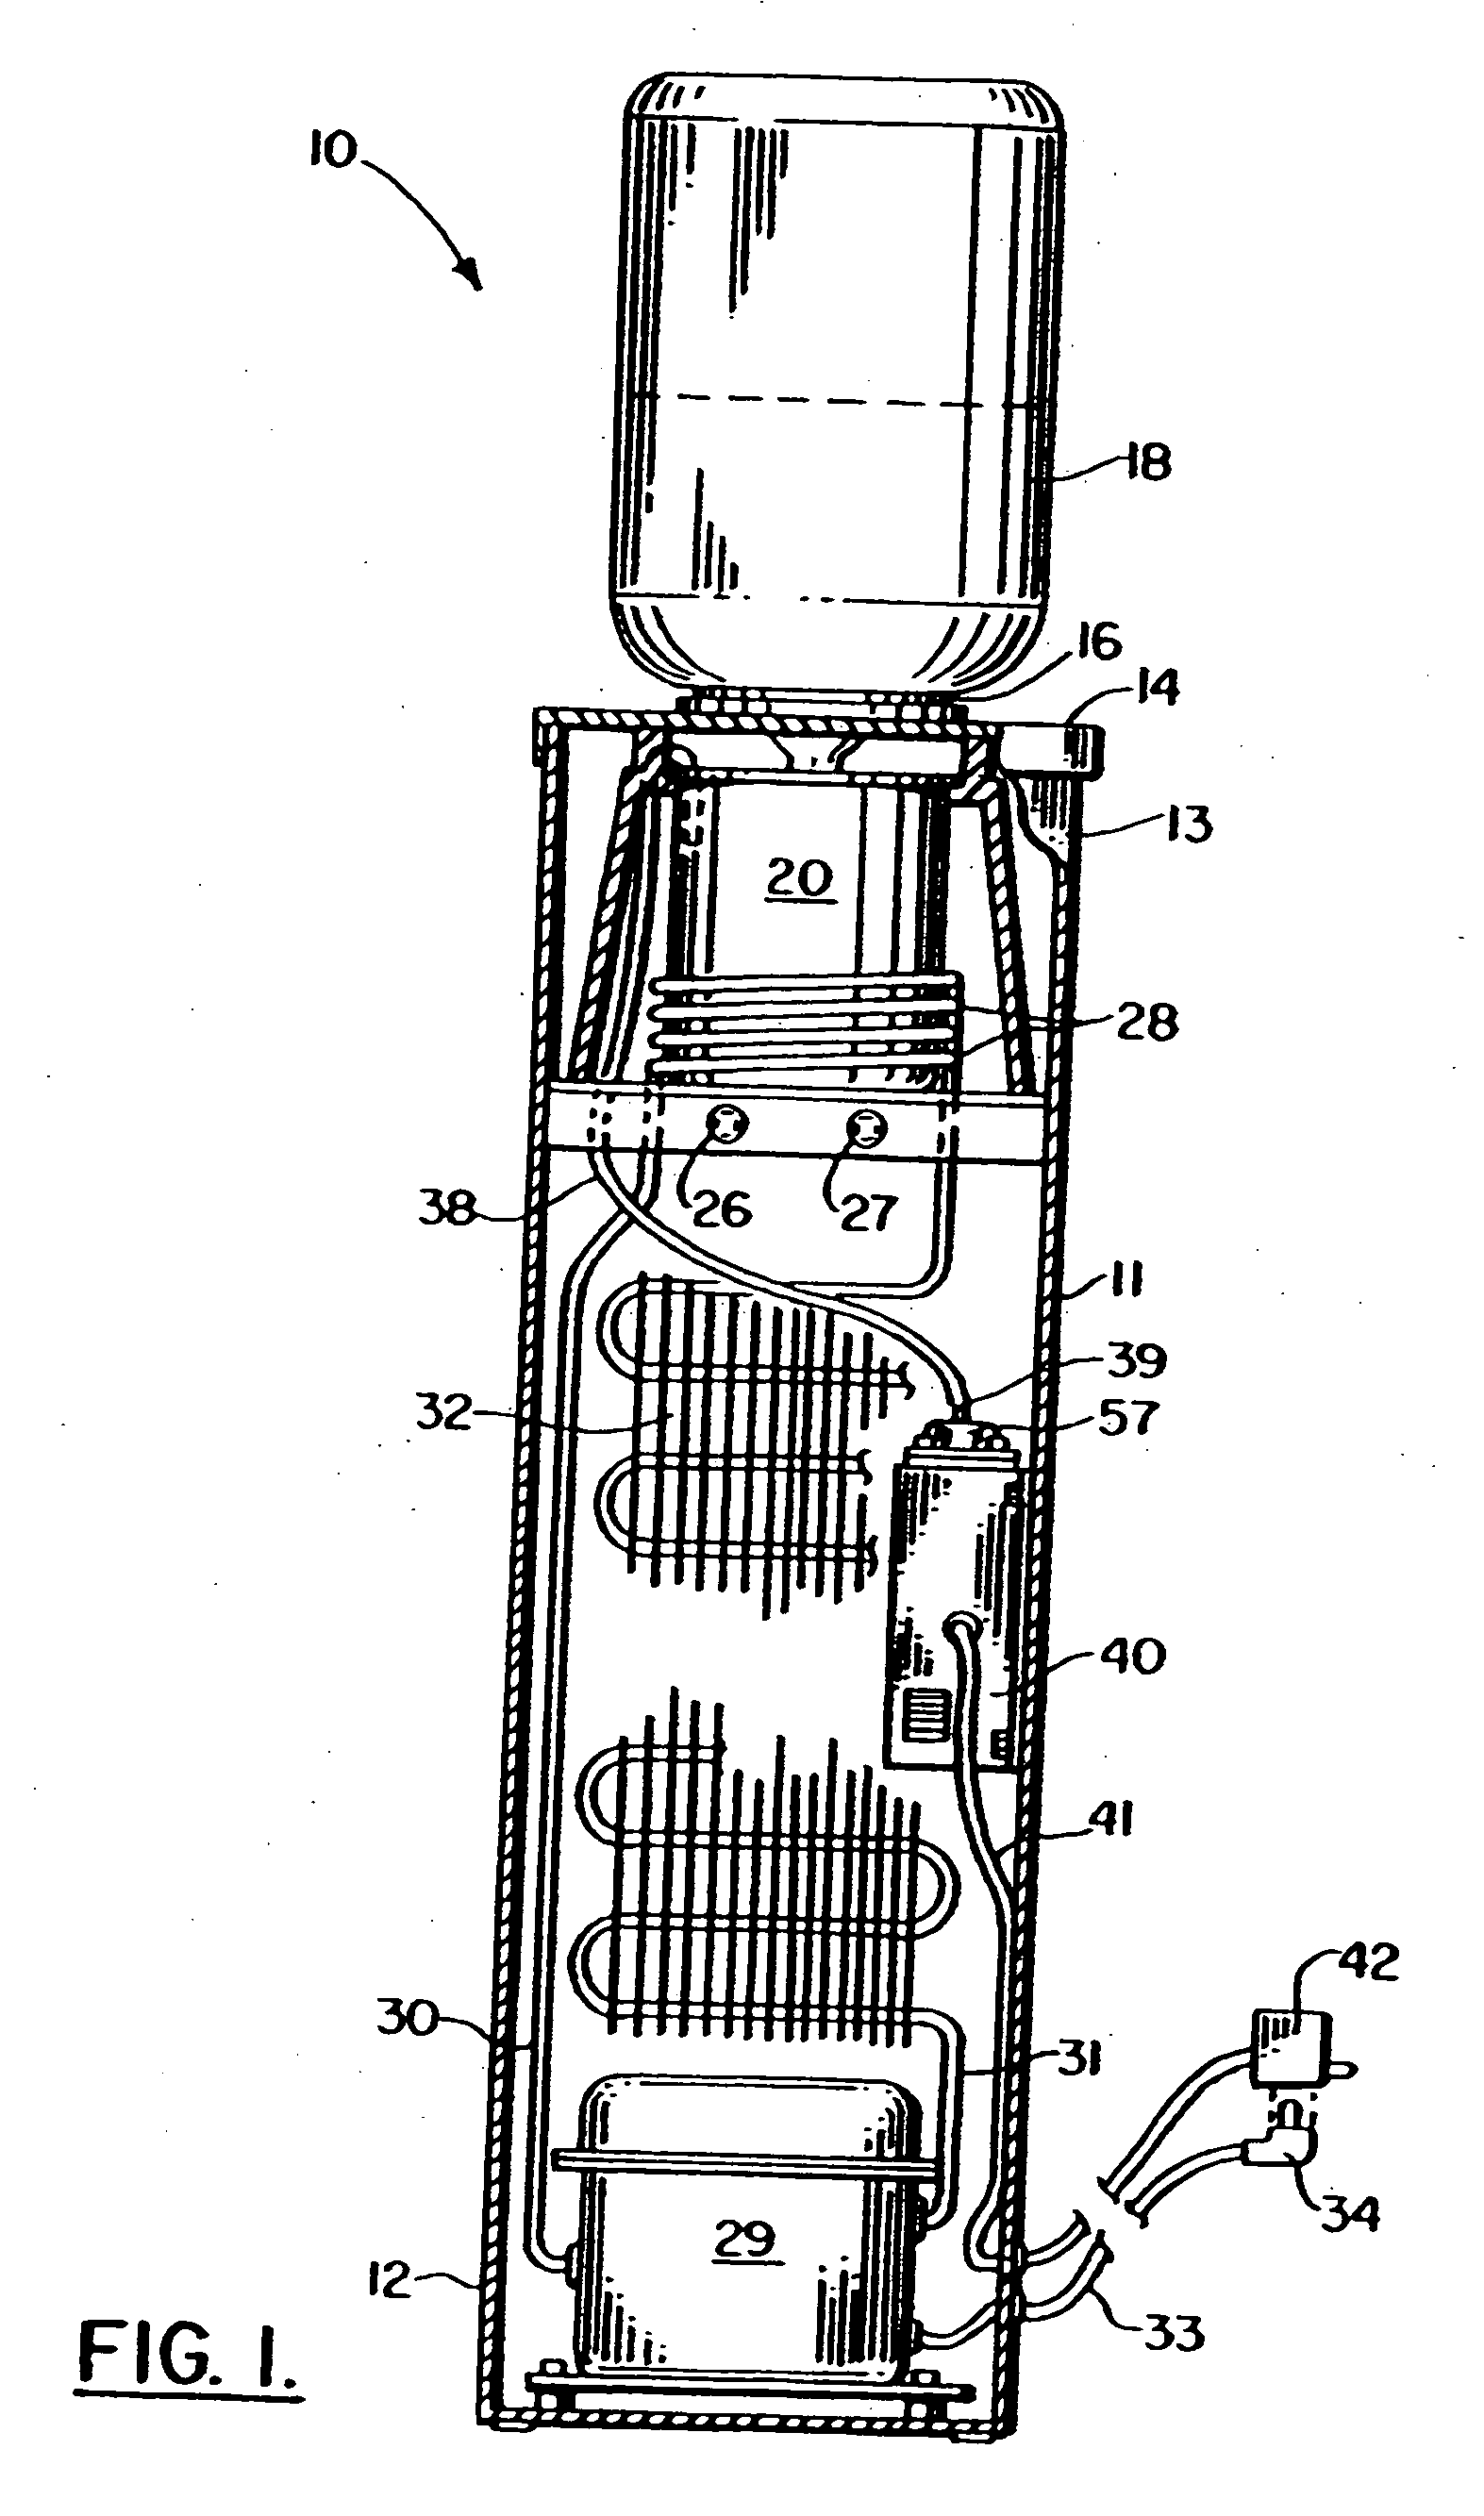 Method and apparatus for disinfecting a refrigerated water cooler resevoir